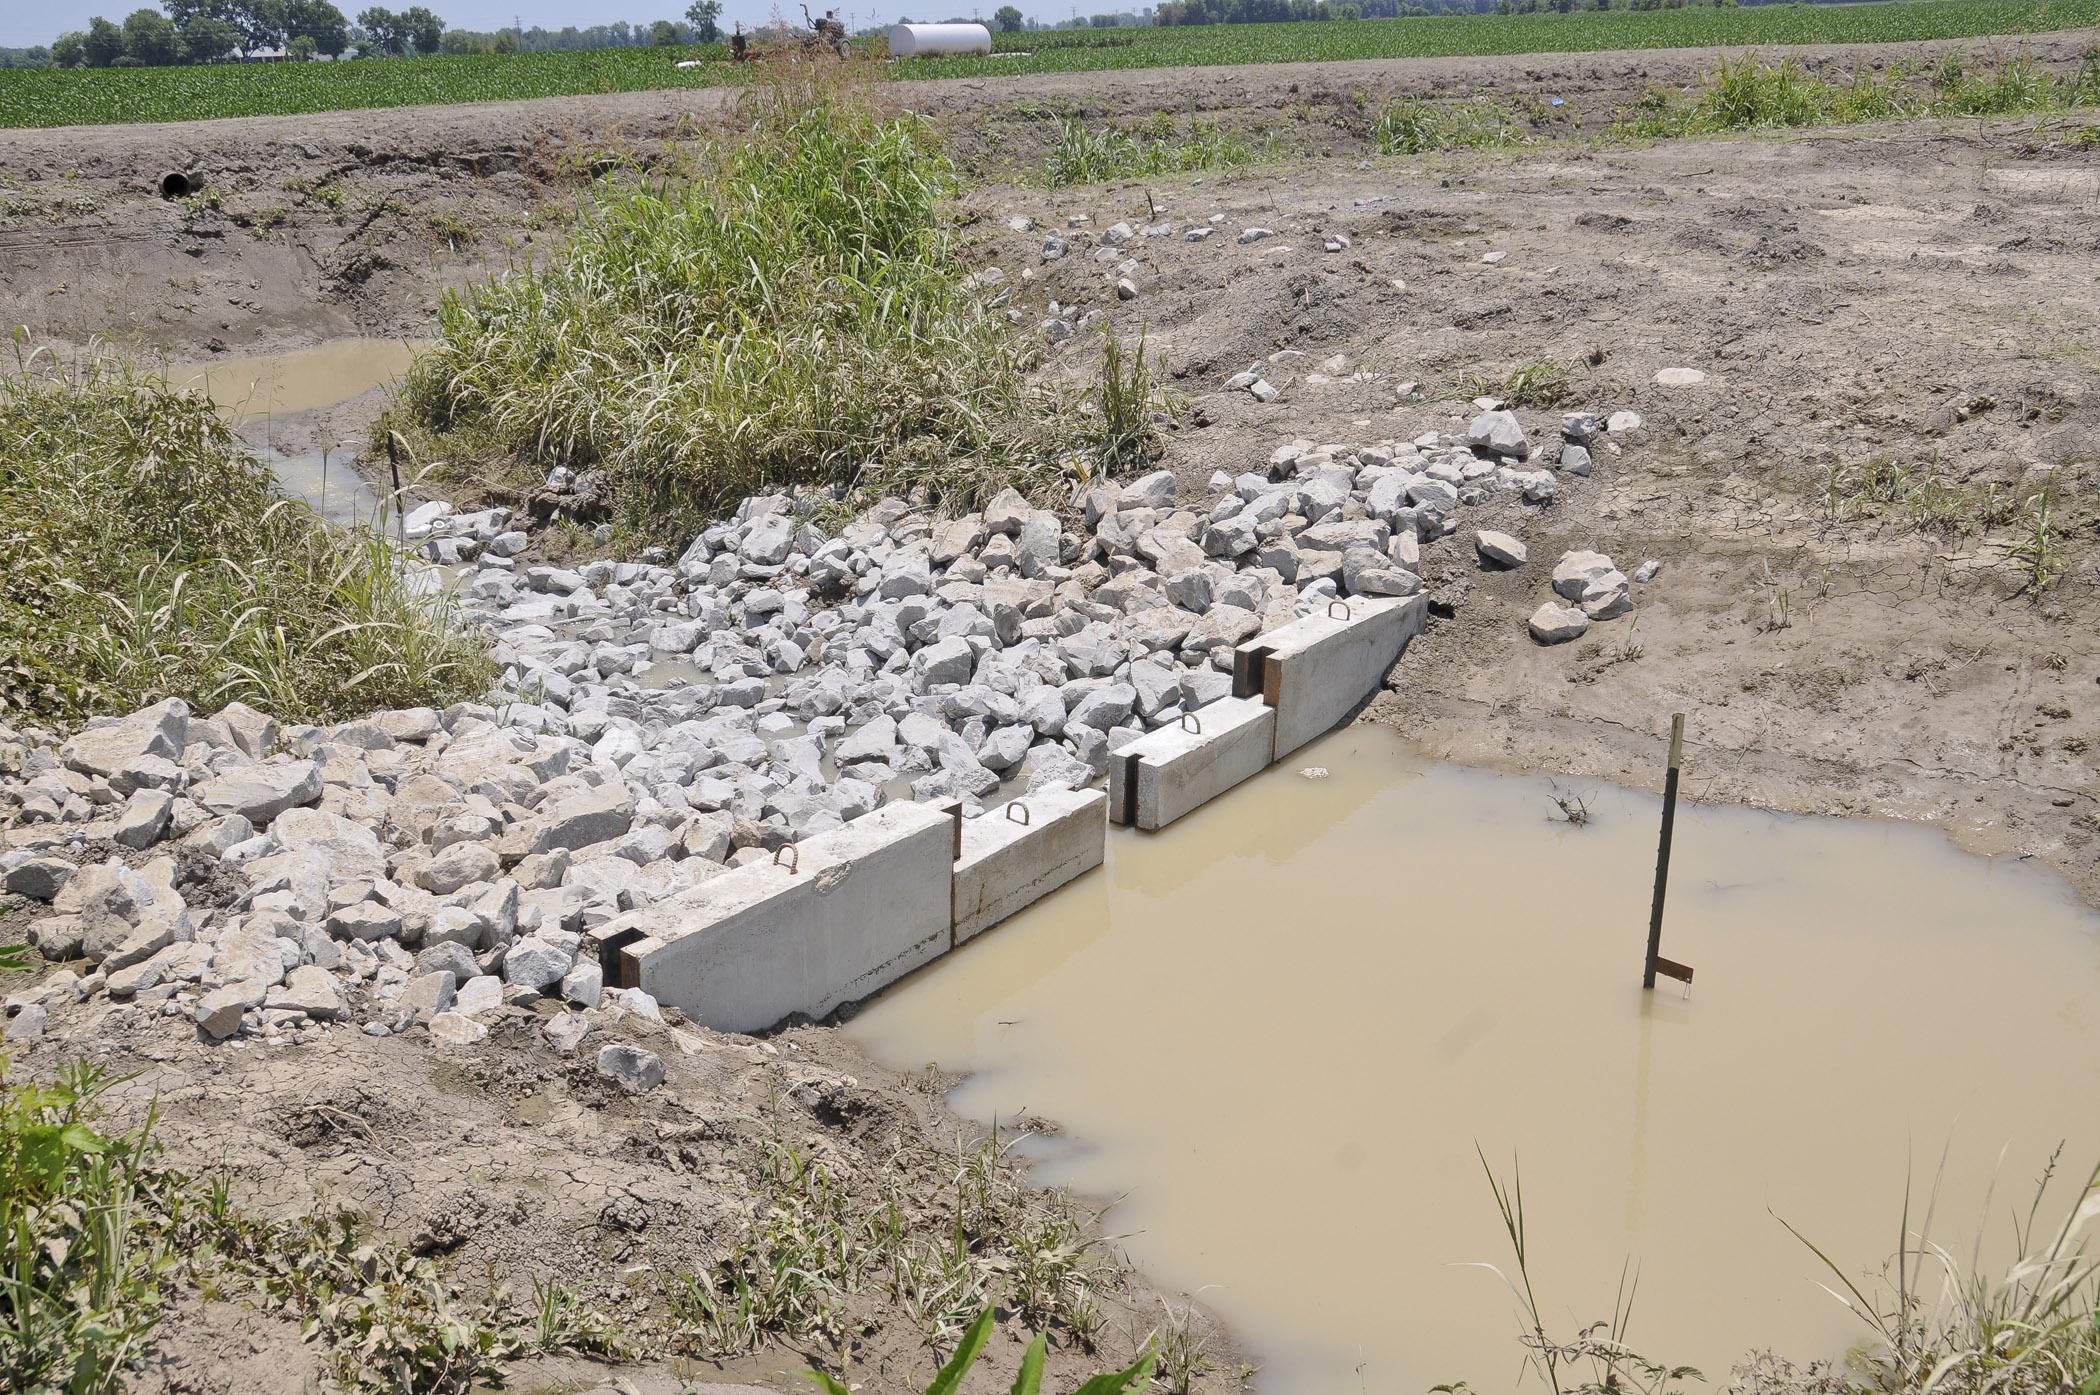 A low-grade weir, such as this one, slows runoff water leaving fields, allowing microbes in the soil and vegetation to pull nutrients out of the water, reducing the nutrients going downstream. (Photo by MSU Ag Communications/Scott Corey)